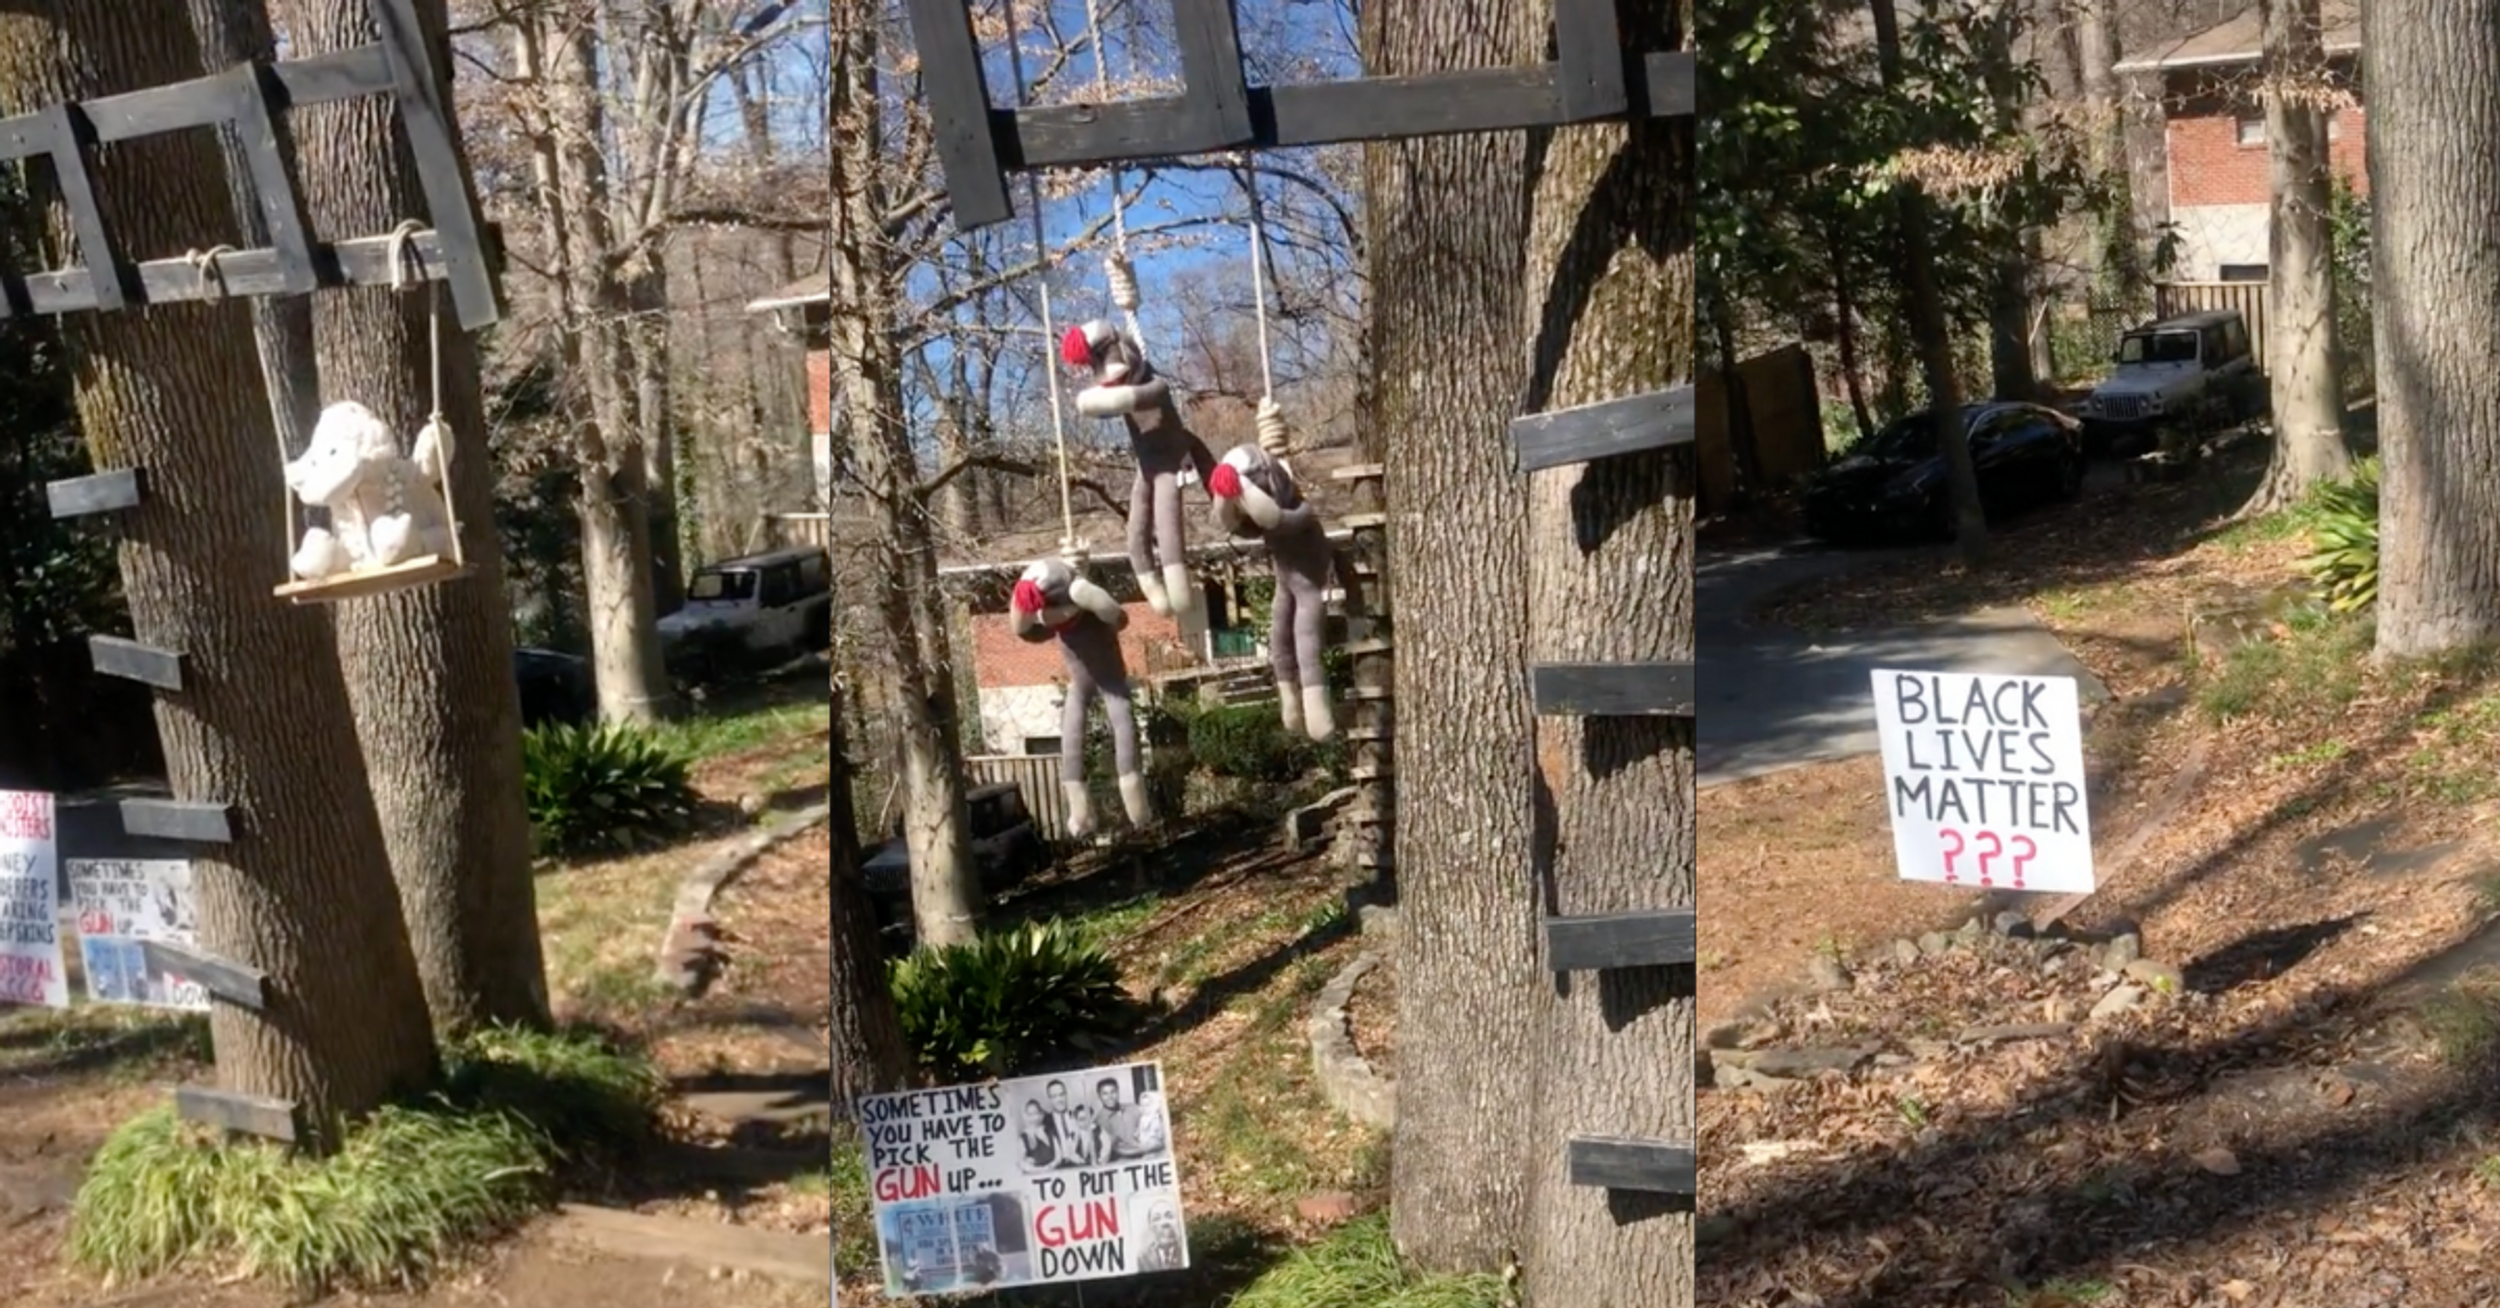 Realtor Horrified After Neighbor Next To Open House Hangs Stuffed Monkeys From Nooses In Racist Display